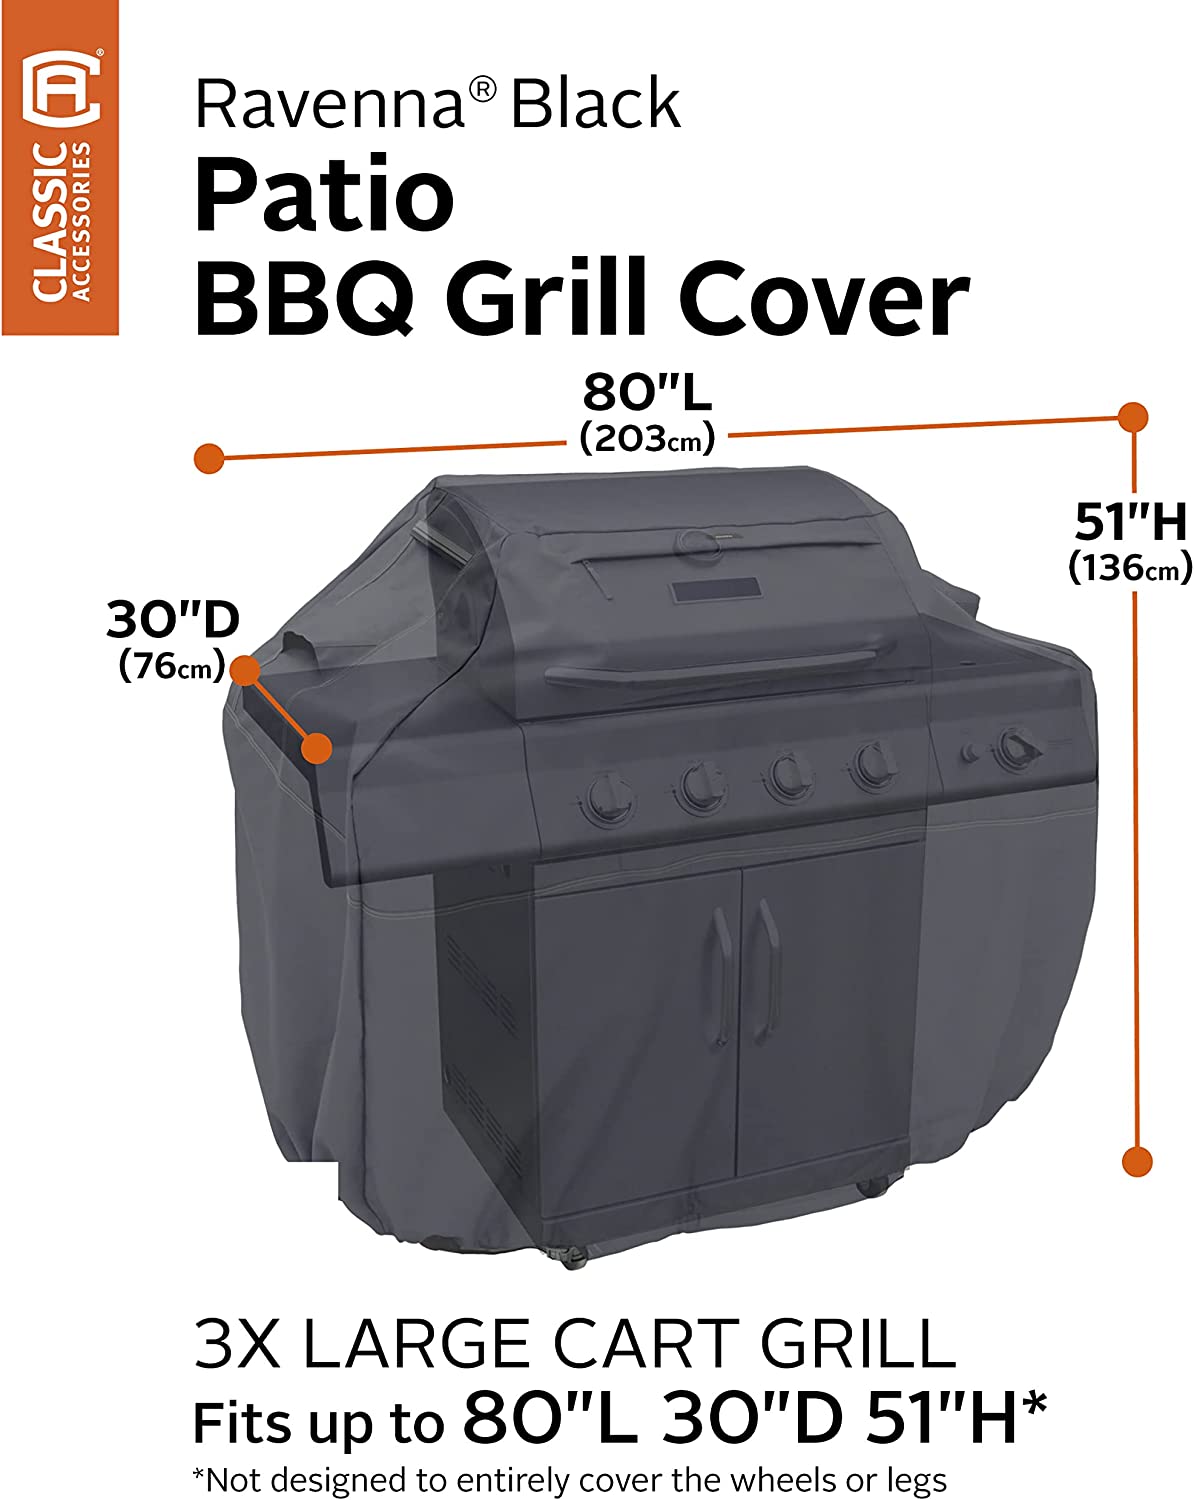 Classic Accessories Ravenna Water-Resistant 80 Inch BBQ Grill Cover